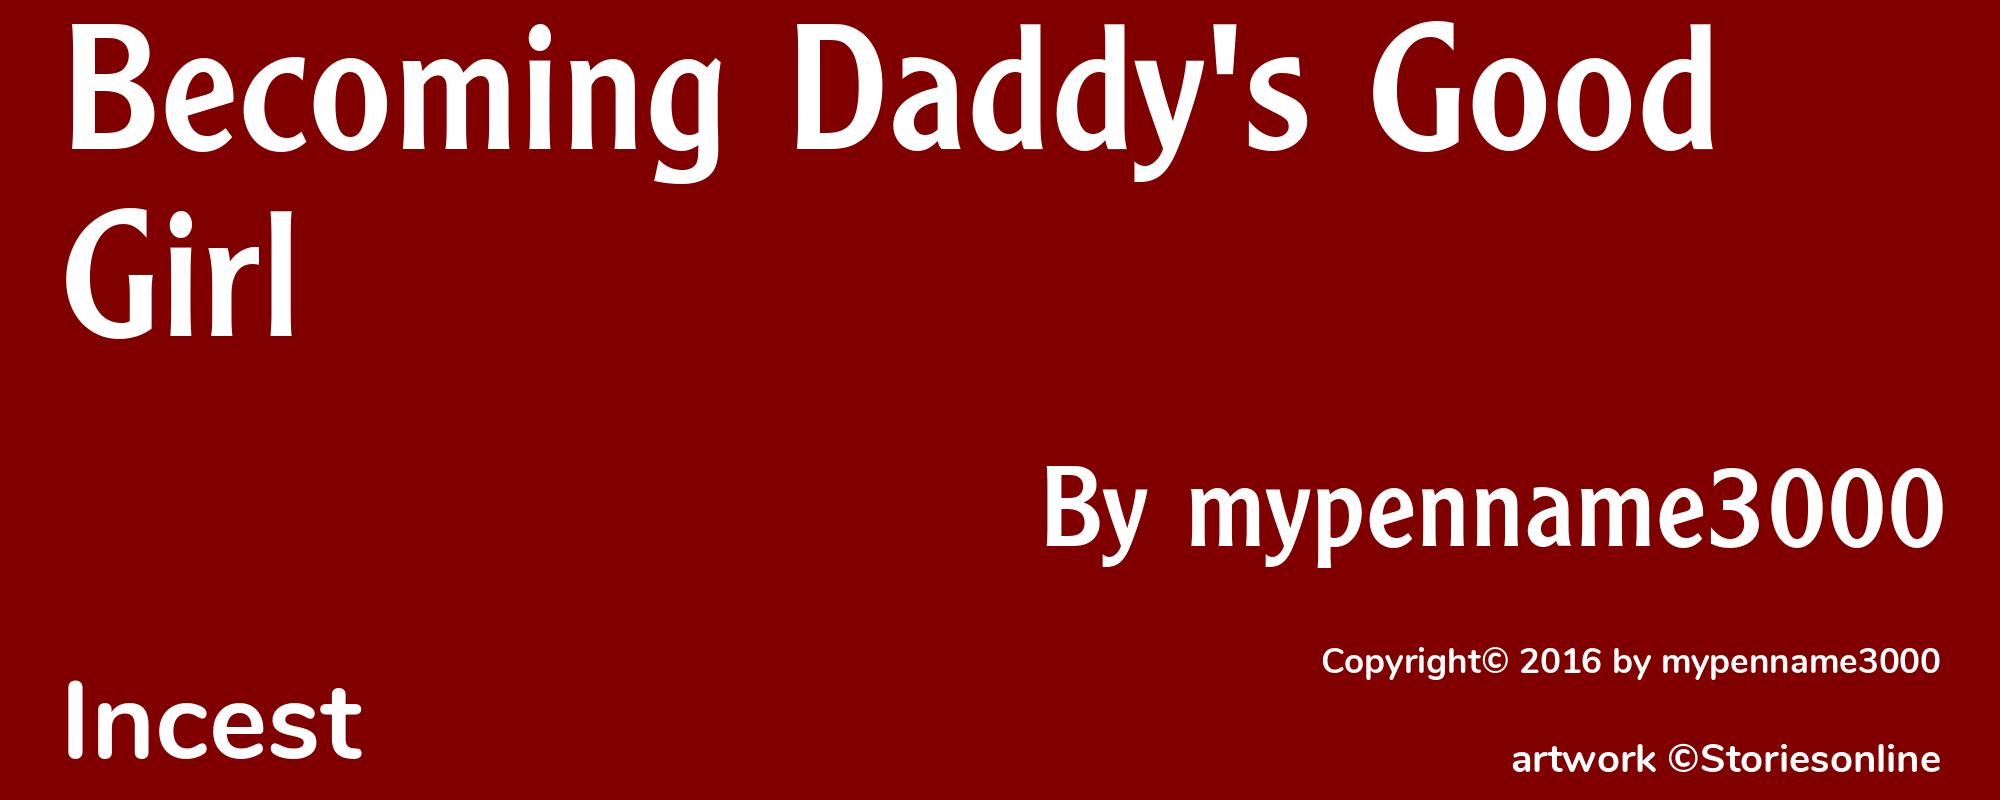 Becoming Daddy's Good Girl - Cover